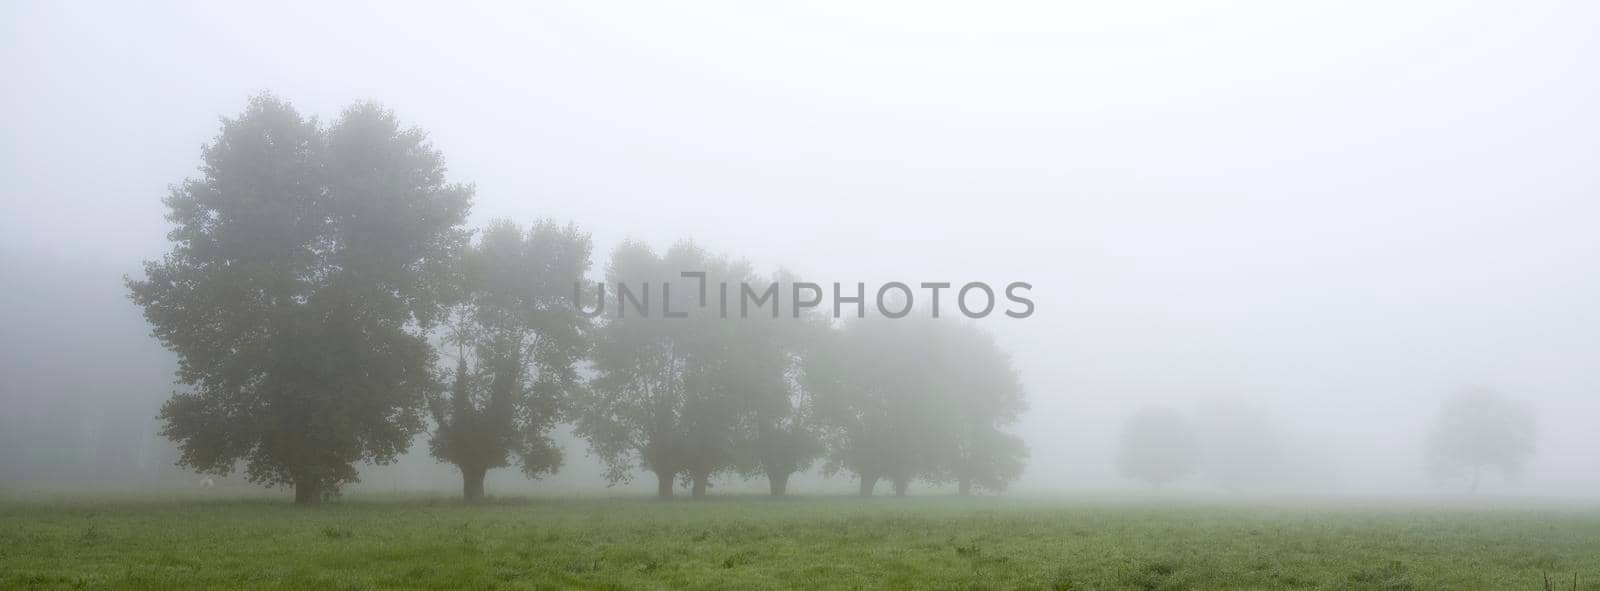 meadow with trees in morning mist of french normandy on panorama photograph